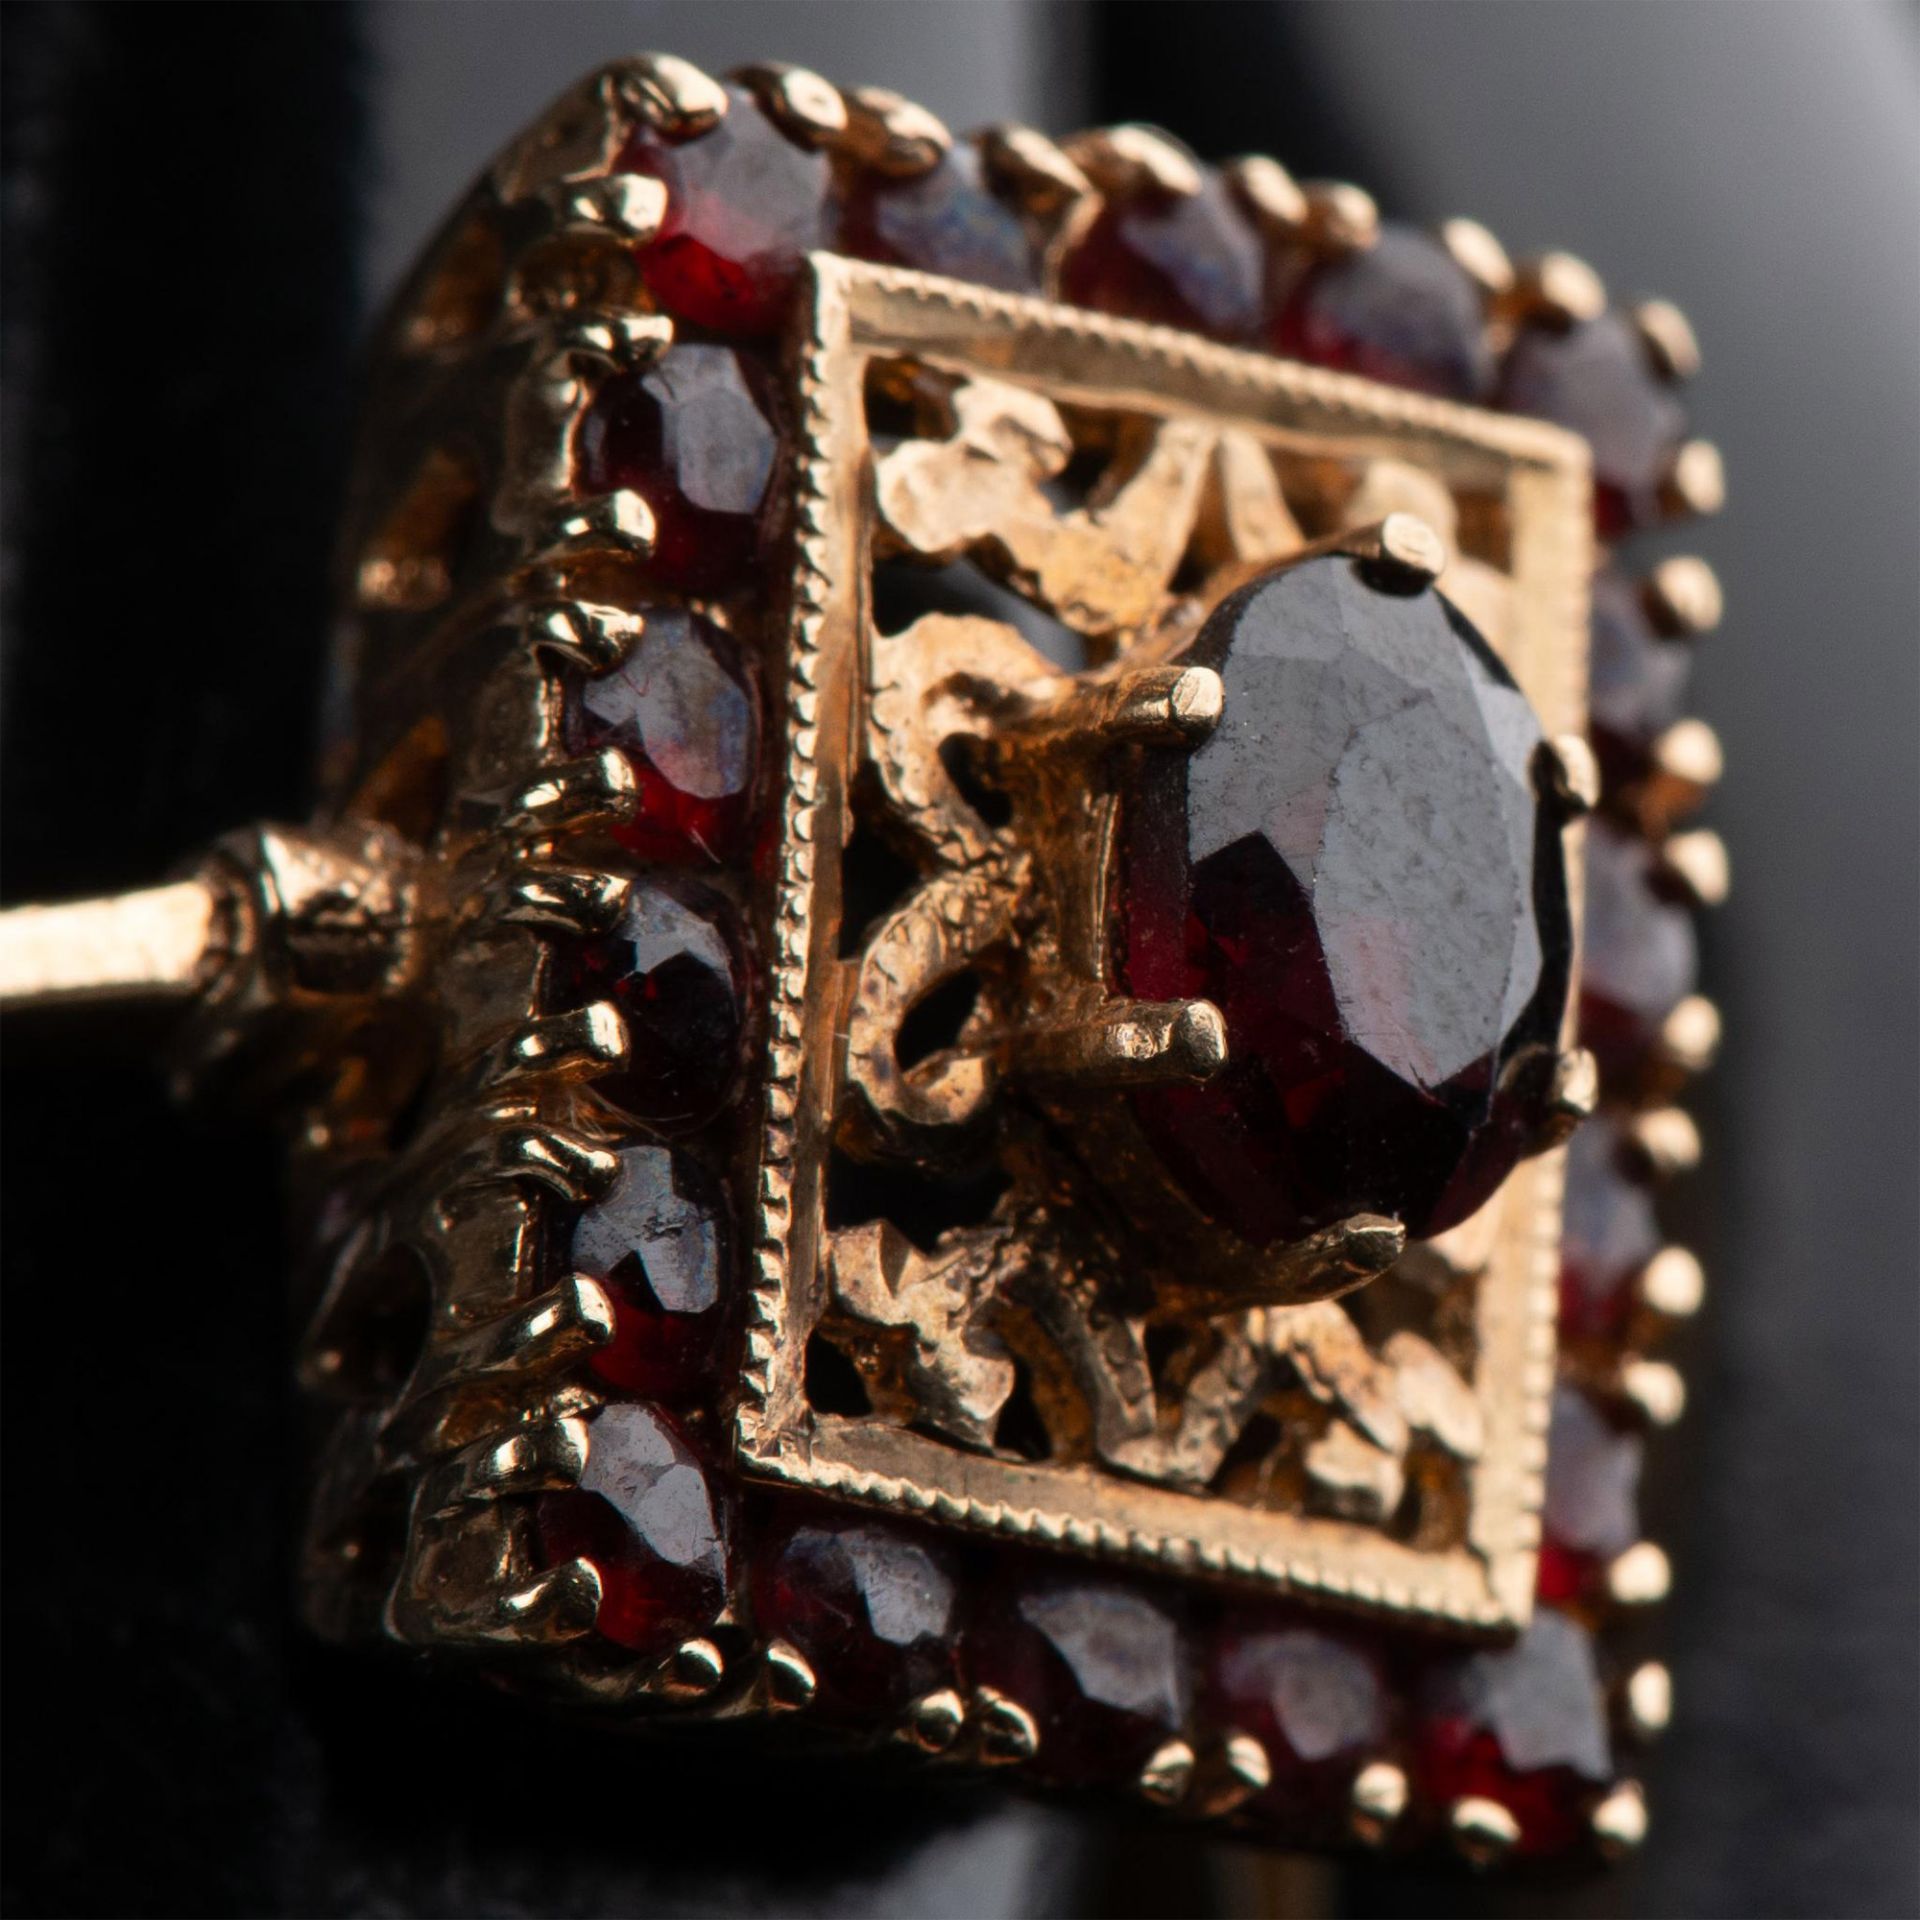 Antique Victorian 9K Gold and Red Garnet Ring - Image 6 of 6